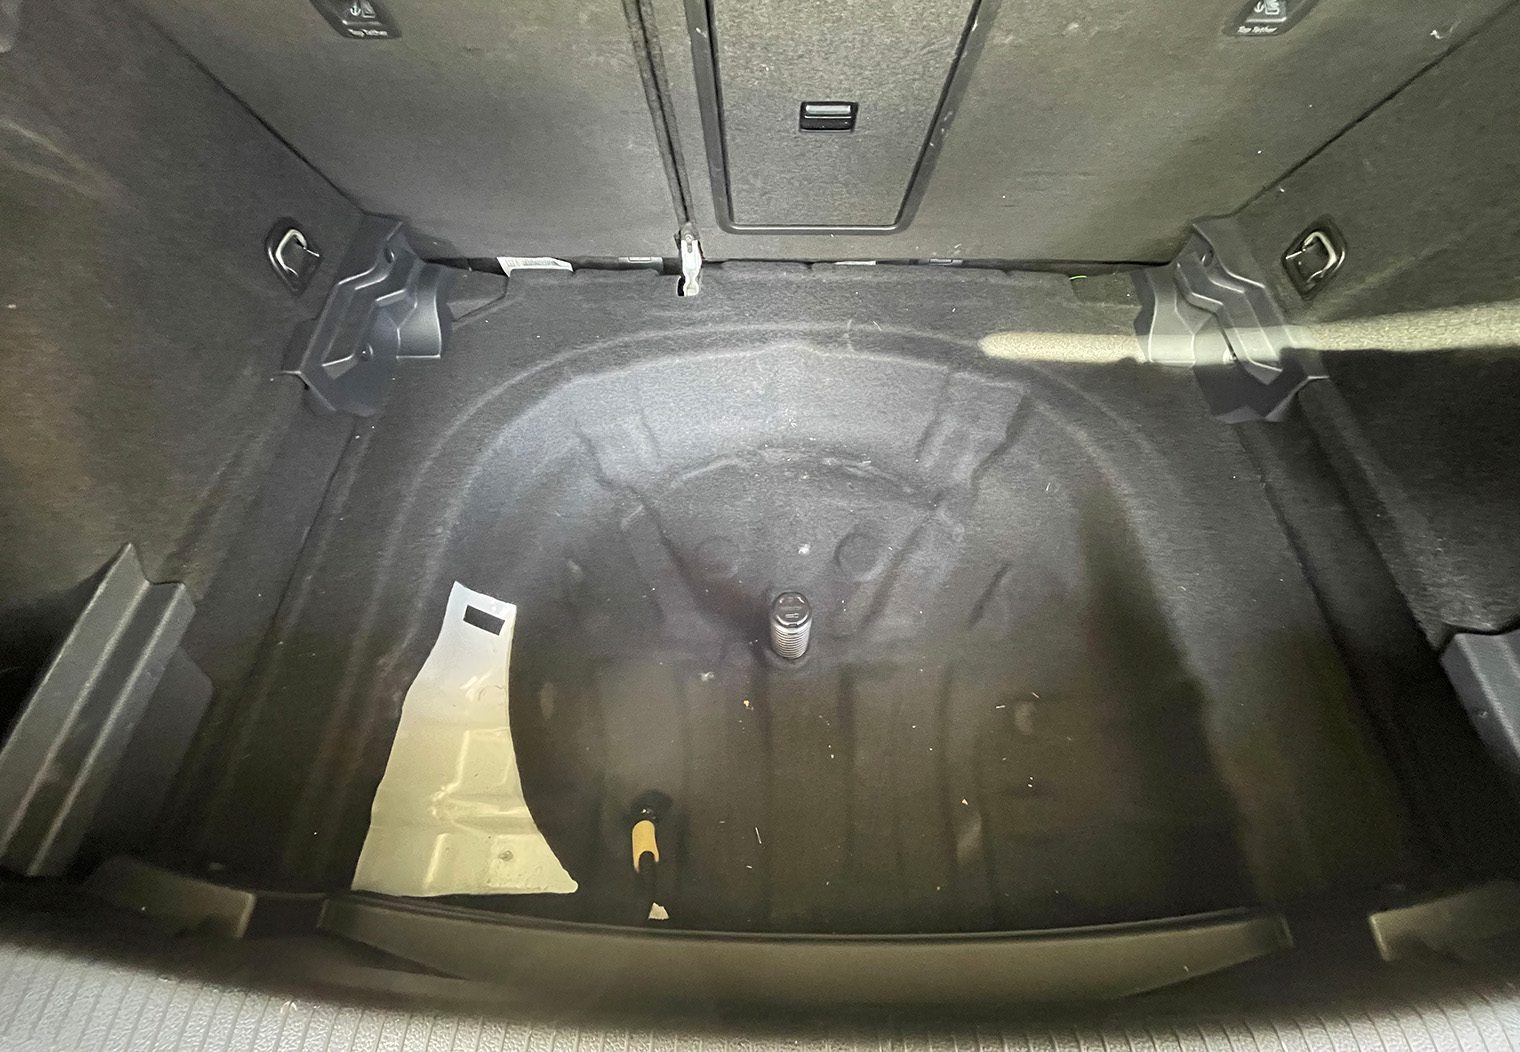 Picture of the OEM trunk space of a Volkswagen GTI MK7.5 with the spare tire and OEM fender subwoofer removed